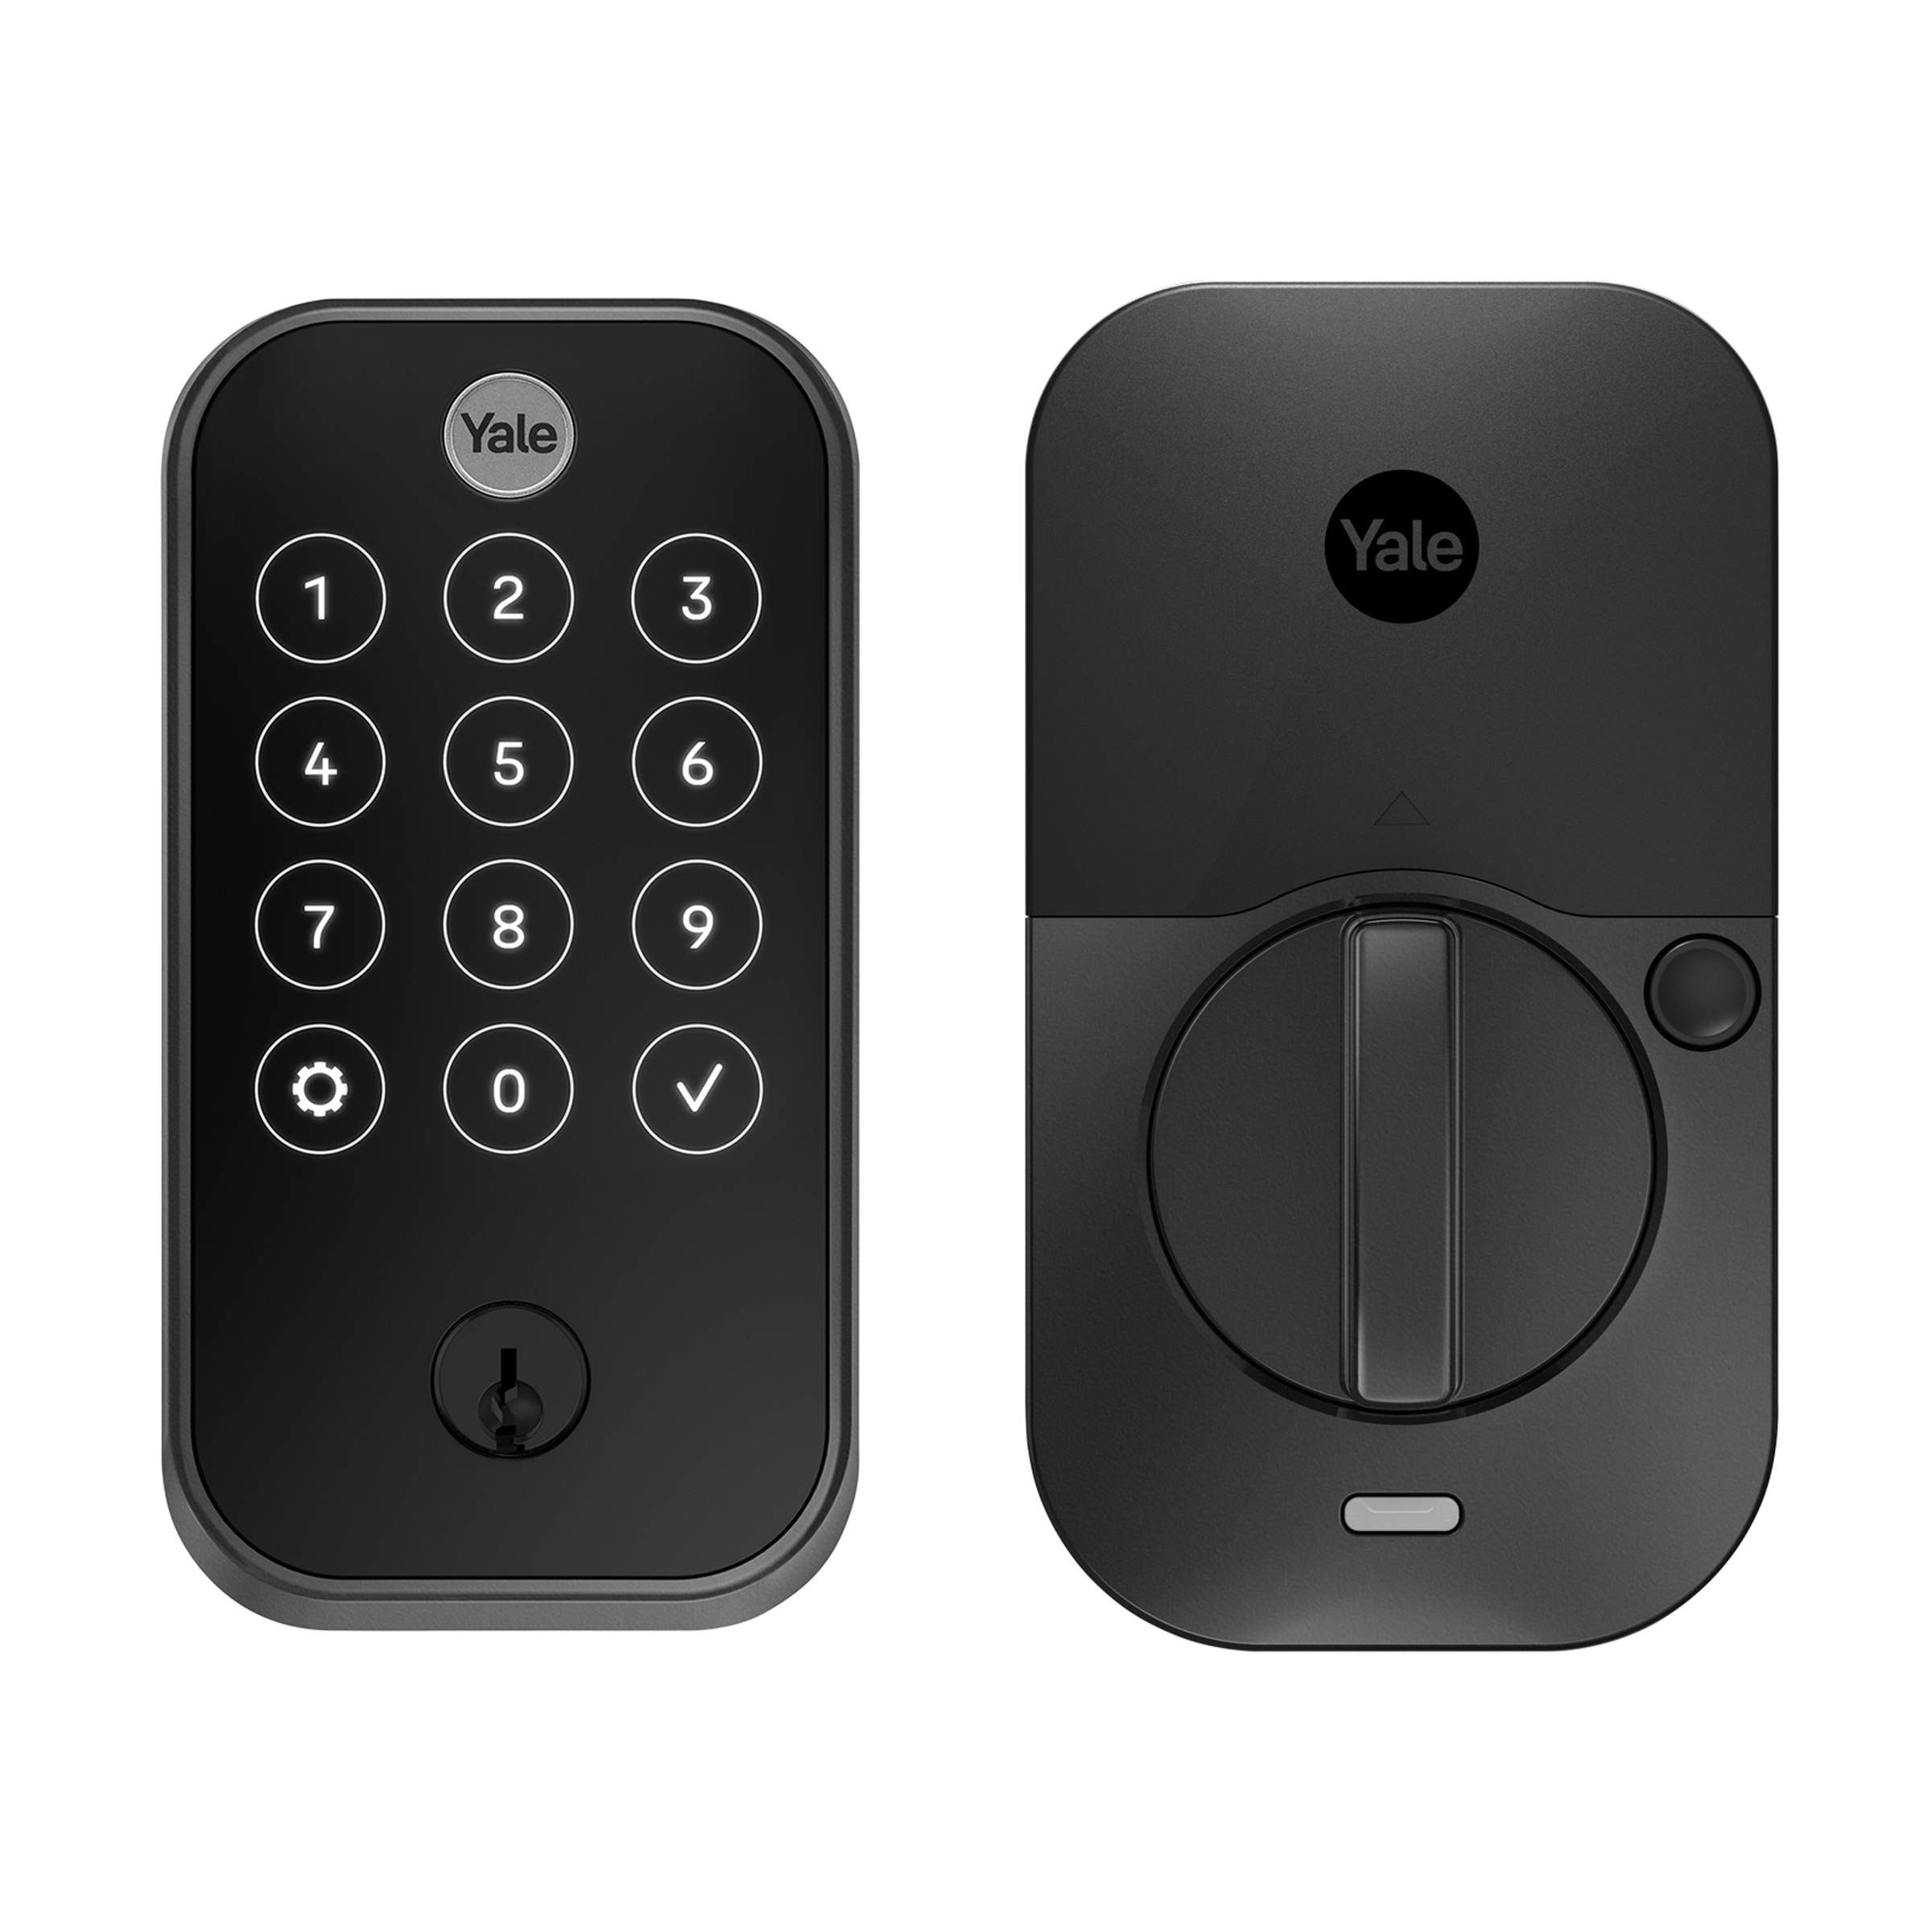 The Yale Assure Lock 2 Touch with a fingerprint reader.